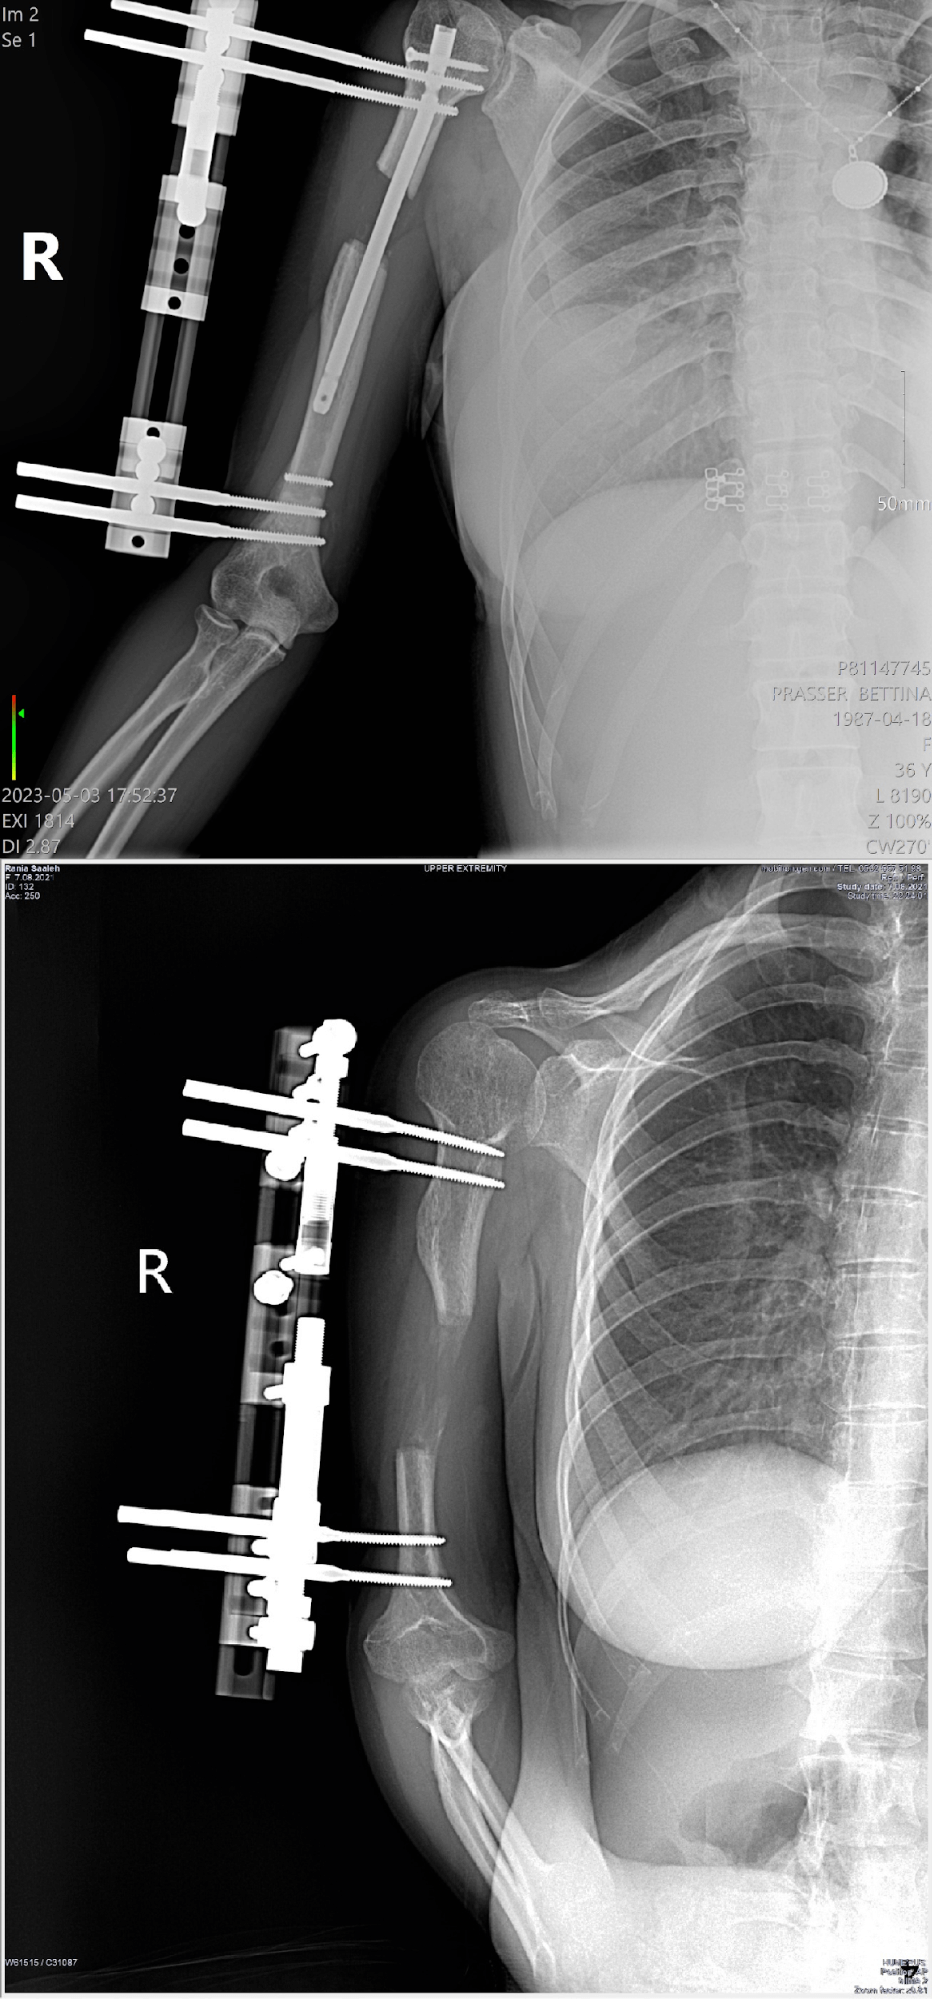 surgical humerus of arm